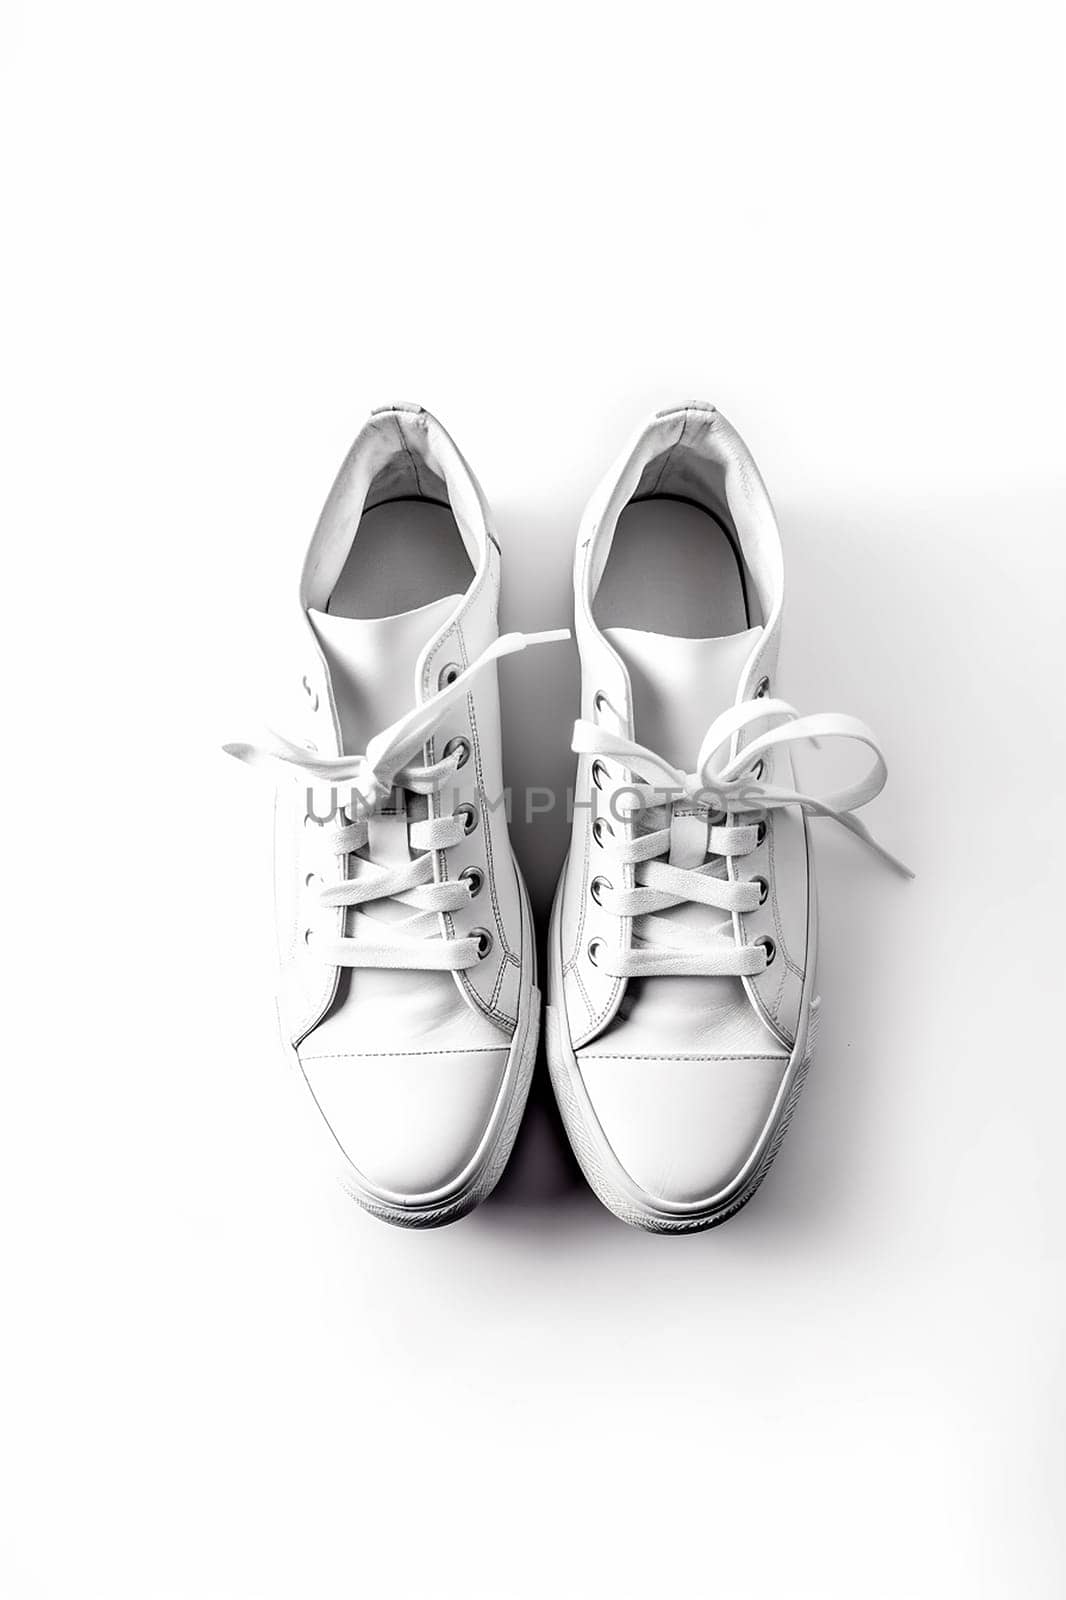 A pair of clean white sneakers against a white background. by Hype2art